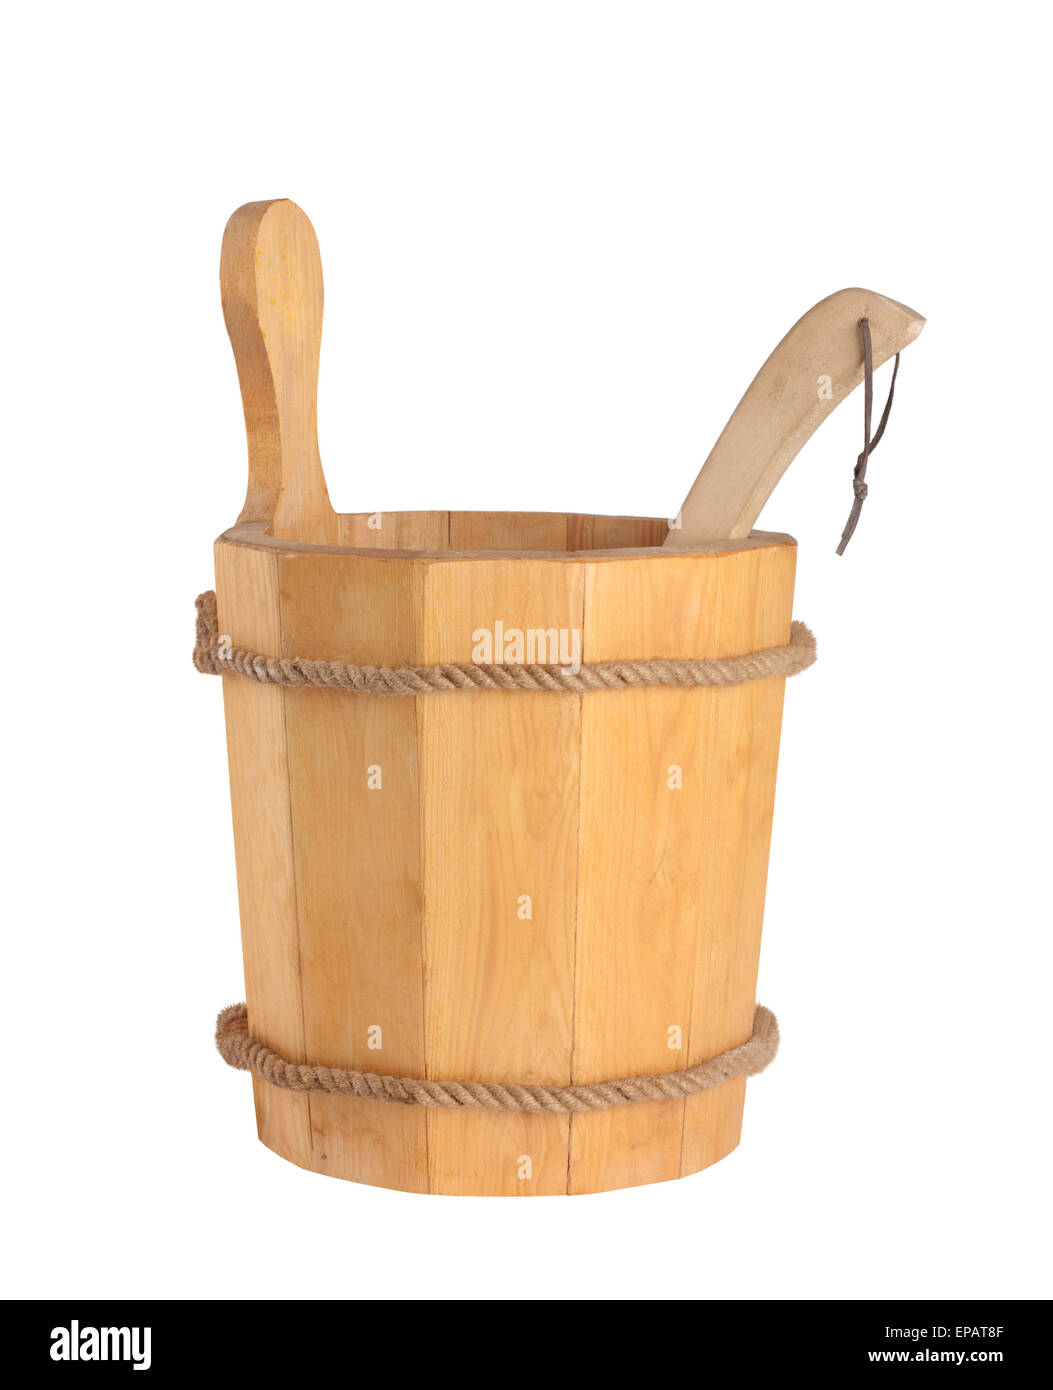 Wooden bucket with ladle for the sauna Isolated on white background Stock Photo